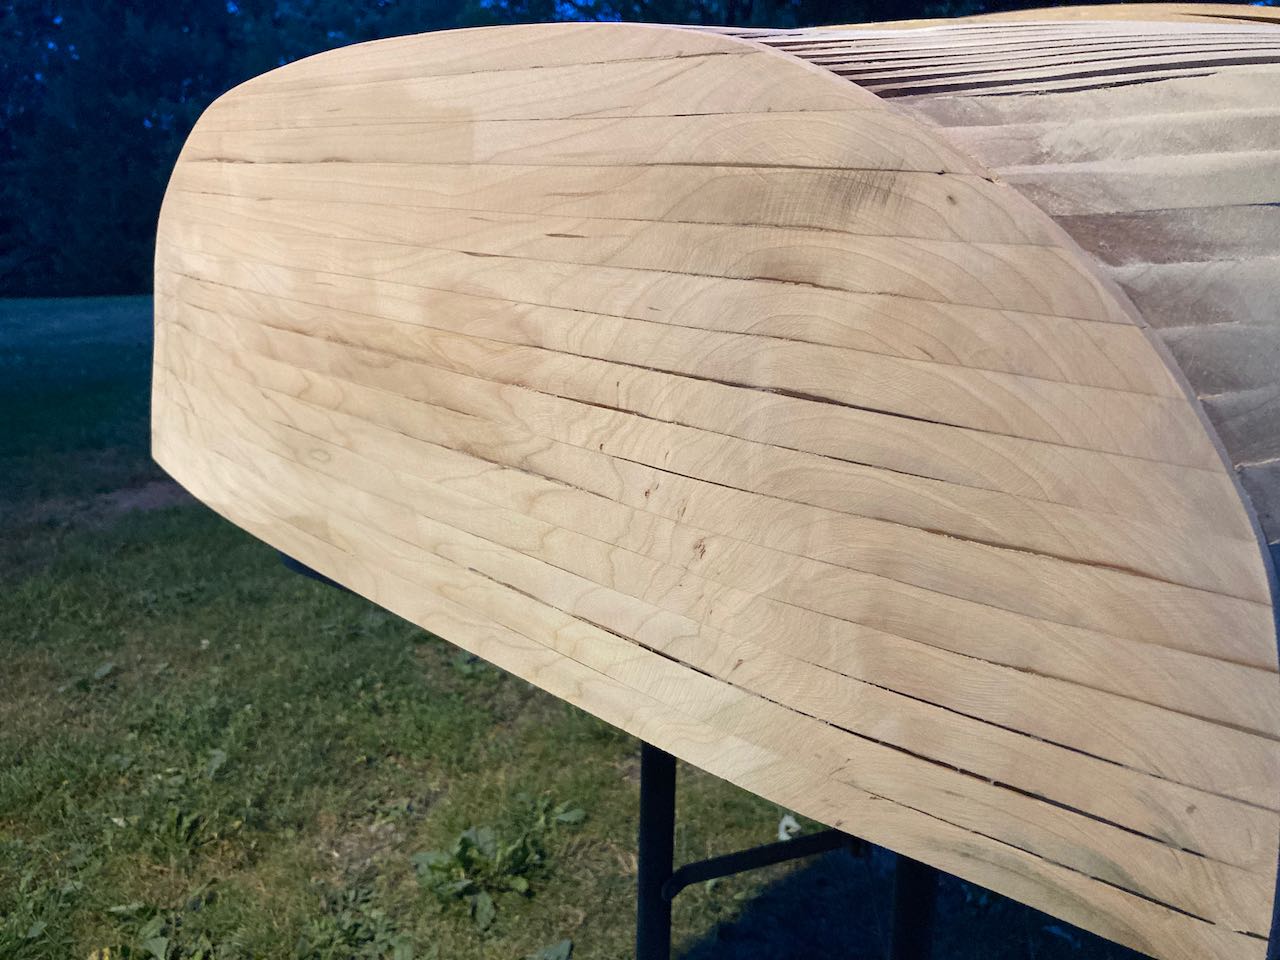 Wooden boat under construction. The aft is fully assembled and rough sanding is in process. This view highlights the grain pattern of the cherry strips.